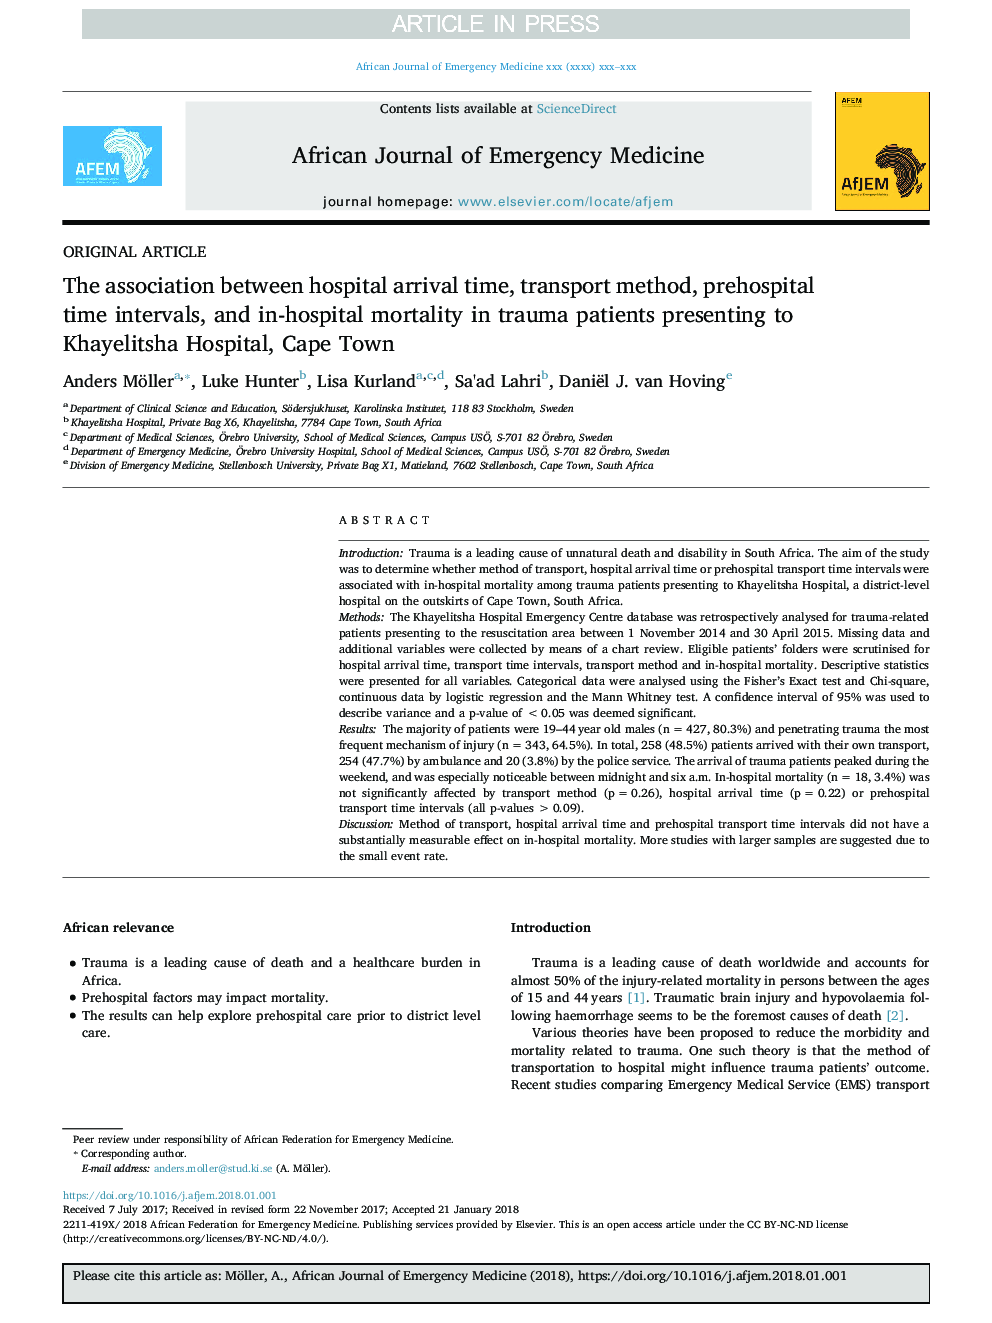 The association between hospital arrival time, transport method, prehospital time intervals, and in-hospital mortality in trauma patients presenting to Khayelitsha Hospital, Cape Town